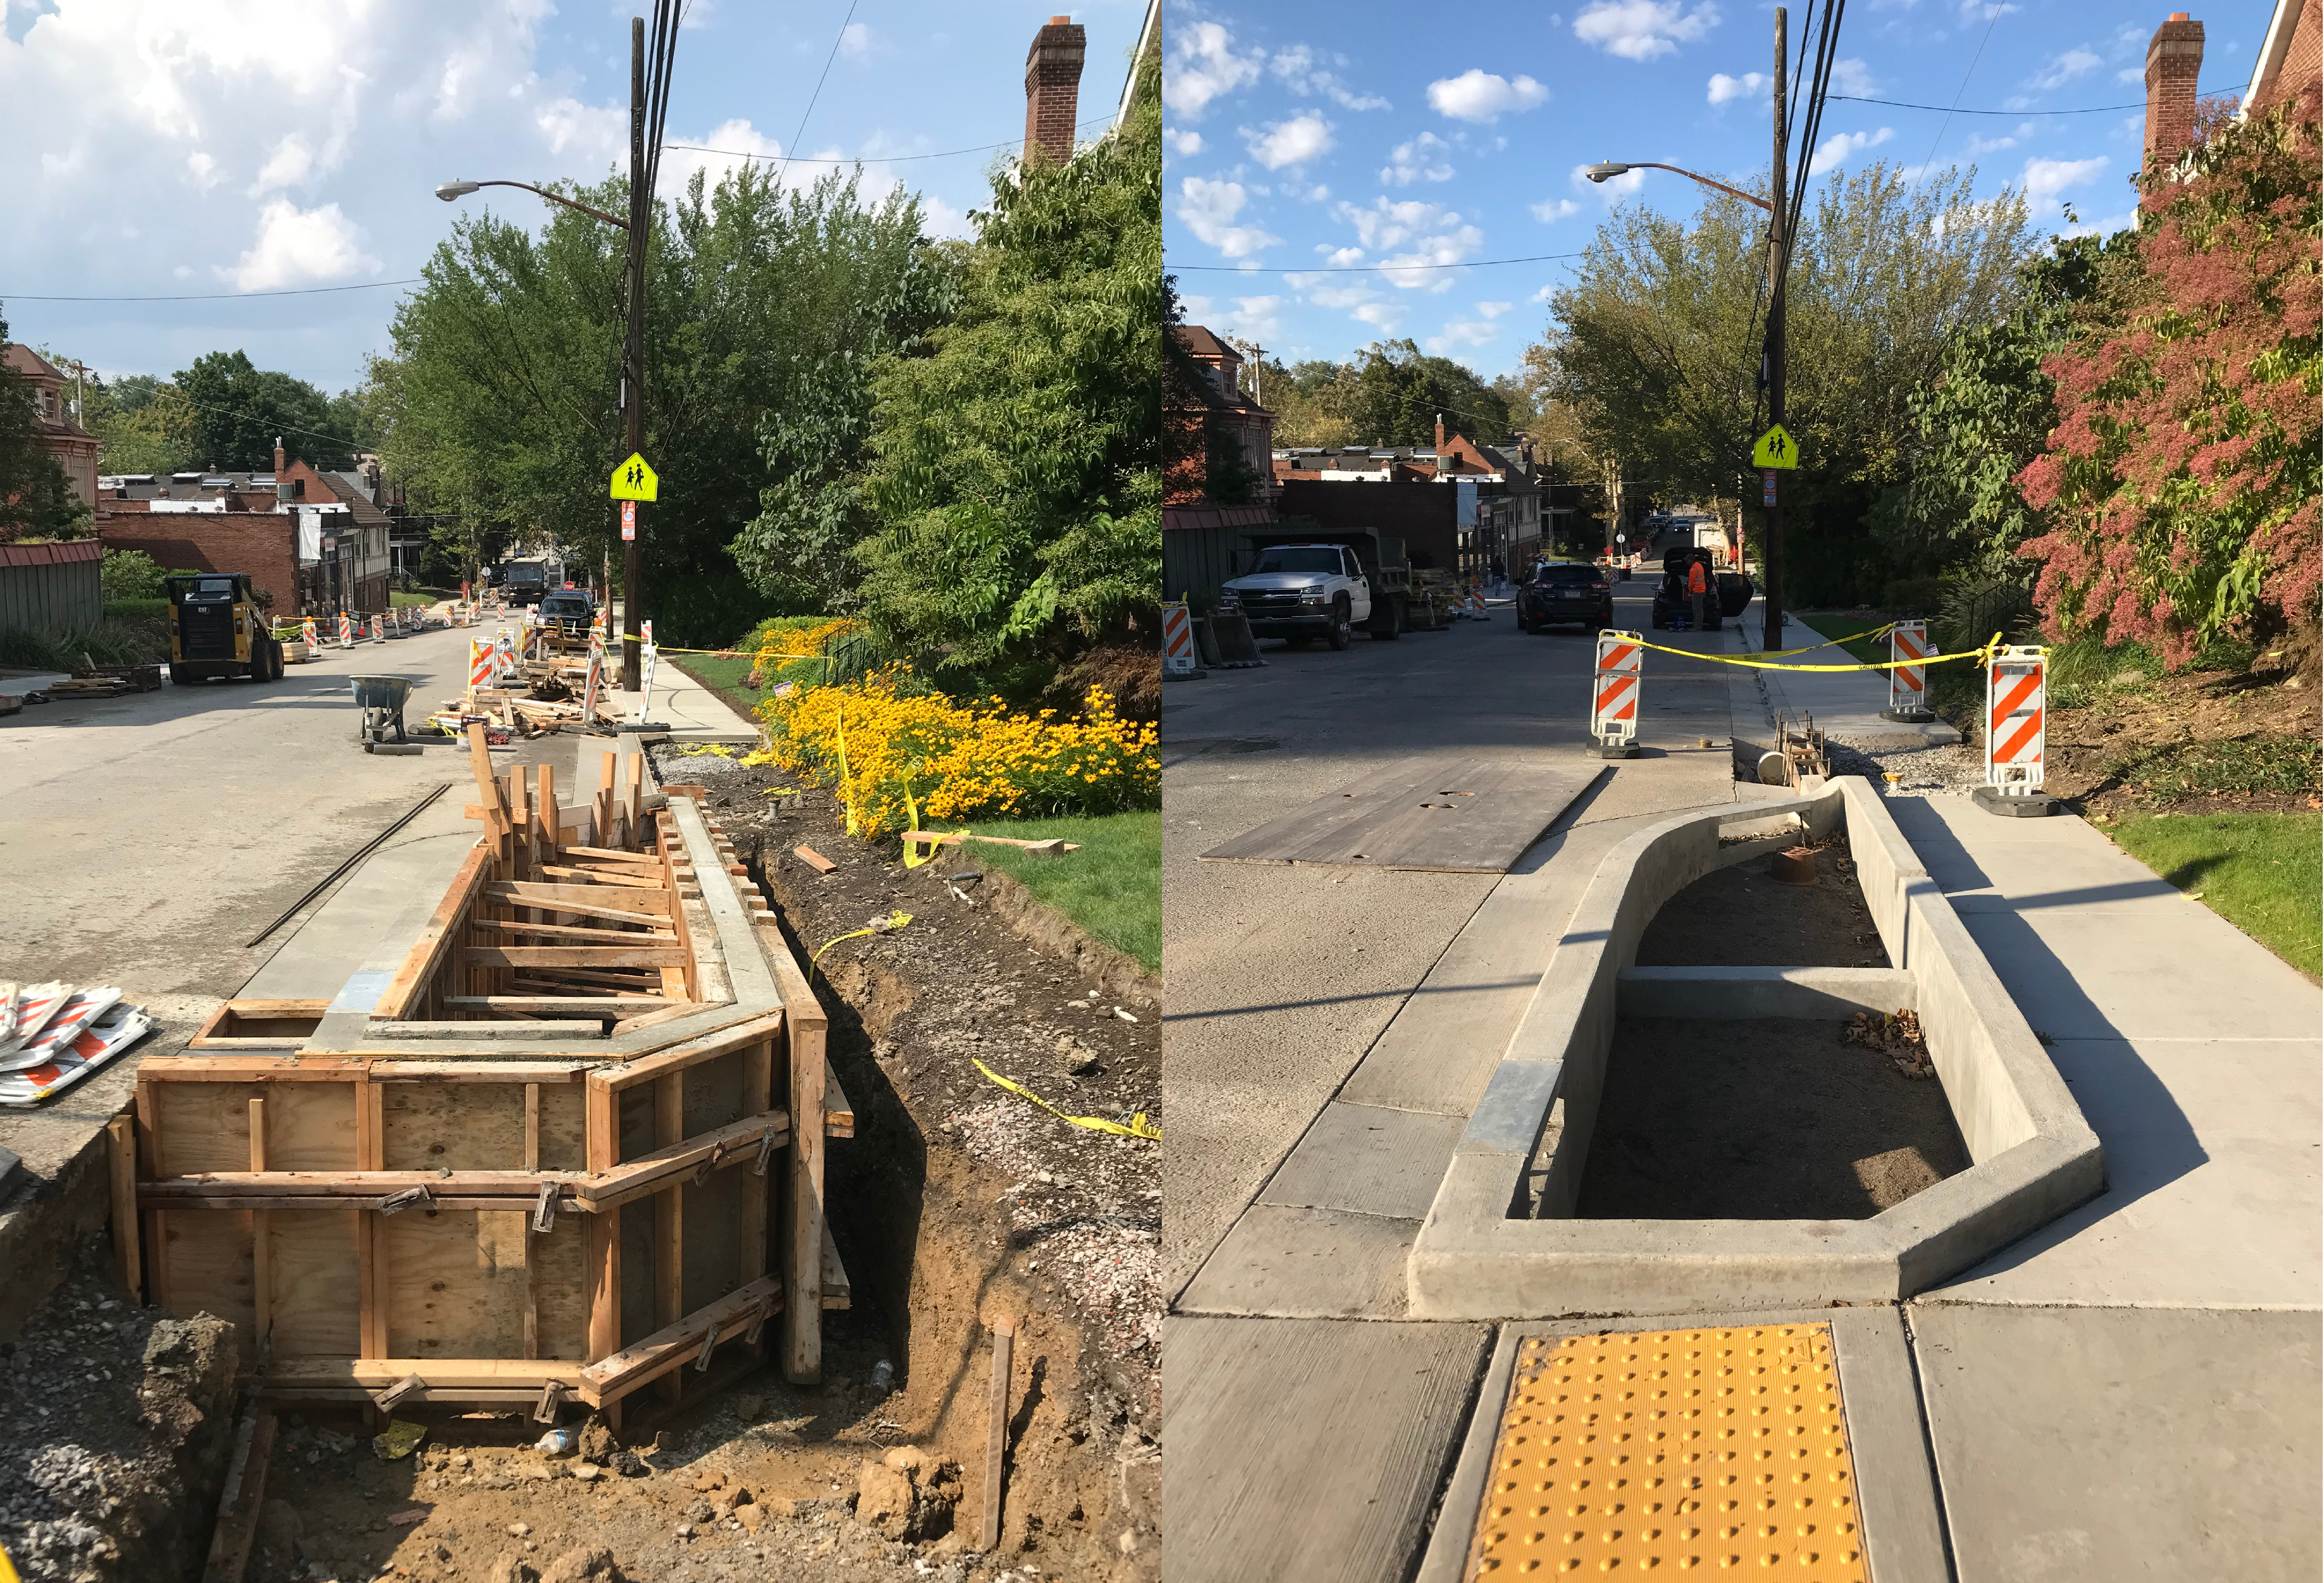 Two photos side-by-side showing a stormwater bumpout with wooden forms for concrete, and the finished concrete bumpout